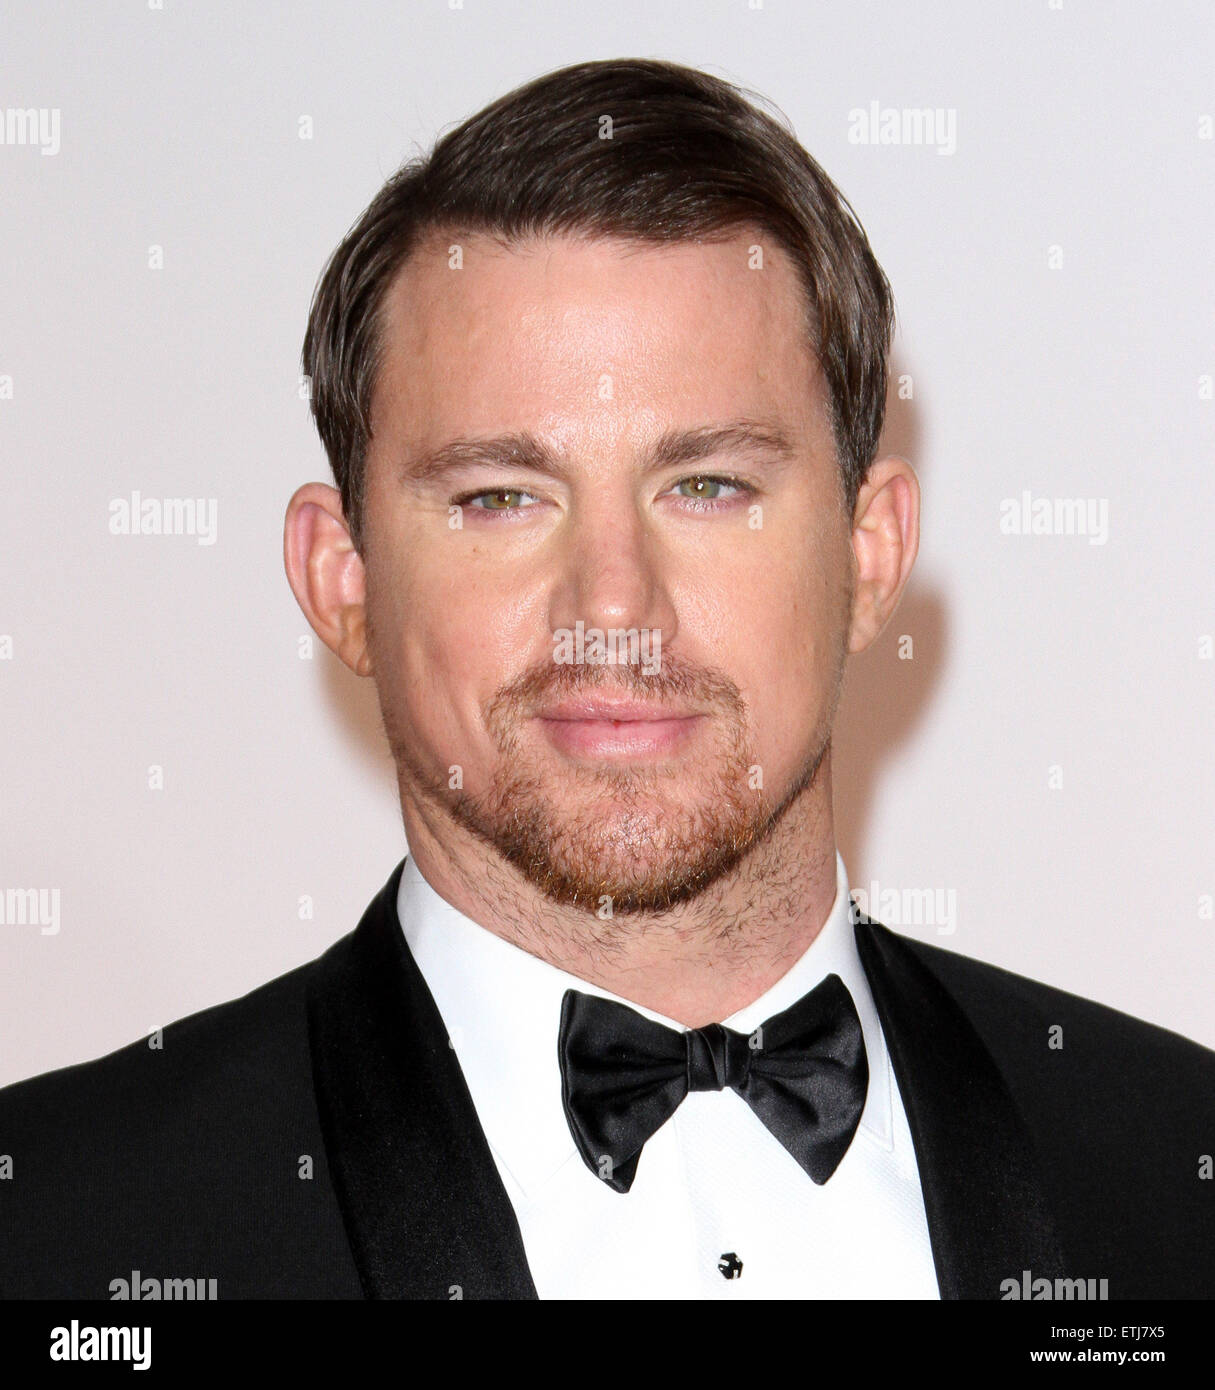 The 87th Annual Oscars held at Dolby Theatre - Red Carpet Arrivals  Featuring: Channing Tatum Where: Los Angeles, California, United States When: 22 Feb 2015 Credit: Adriana M. Barraza/WENN.com Stock Photo